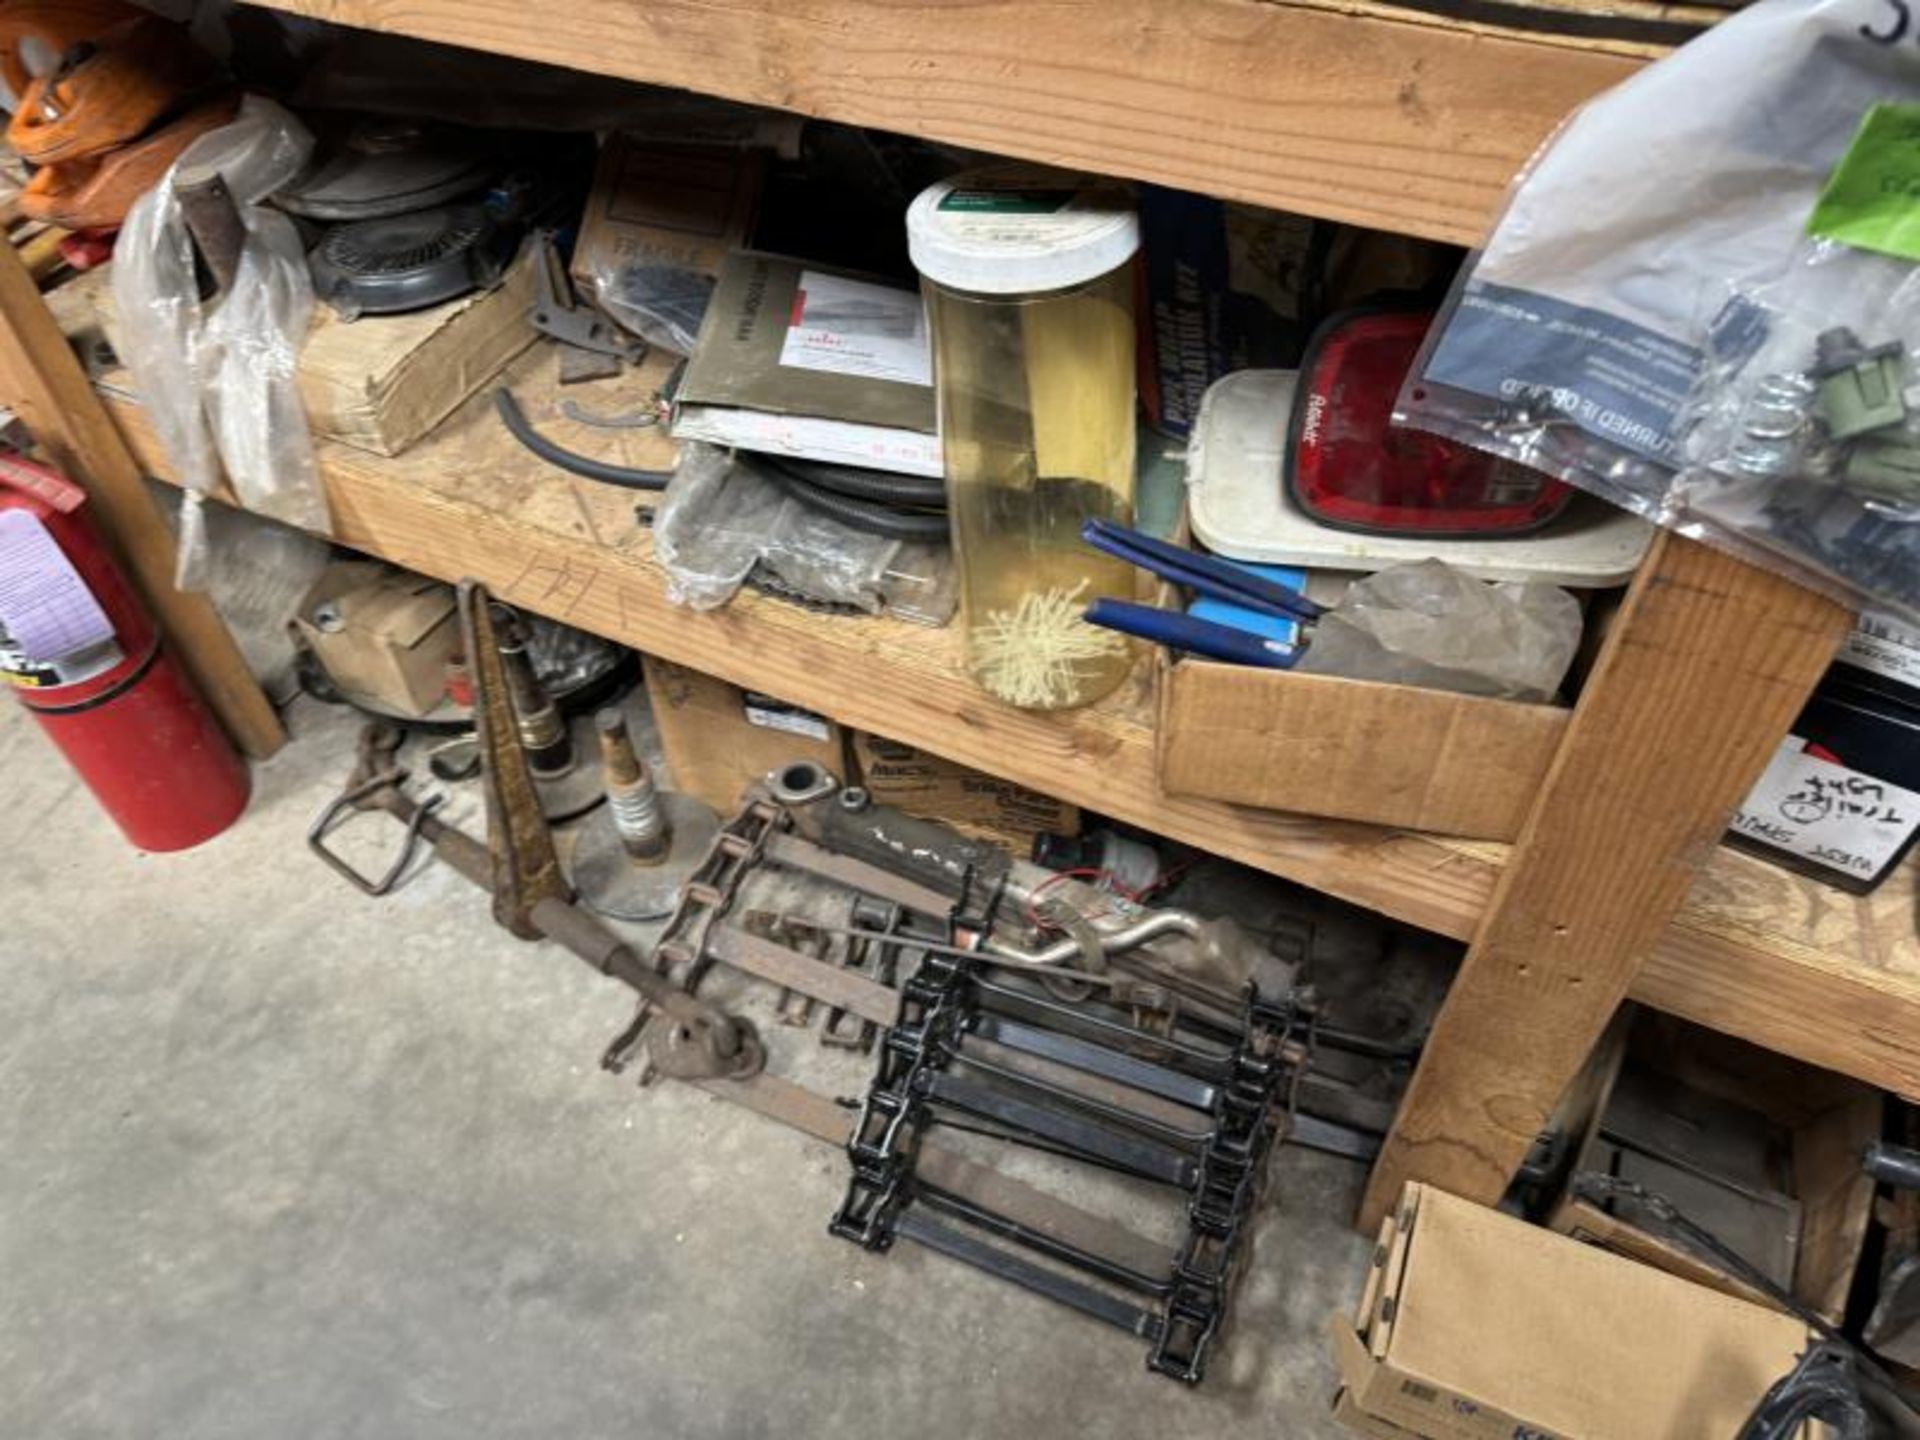 Contents of Shelving Unit (NOT SHELF) Including: Spray Paint, Concrete Adhesive, Vehicles Fuses, Veh - Image 10 of 11